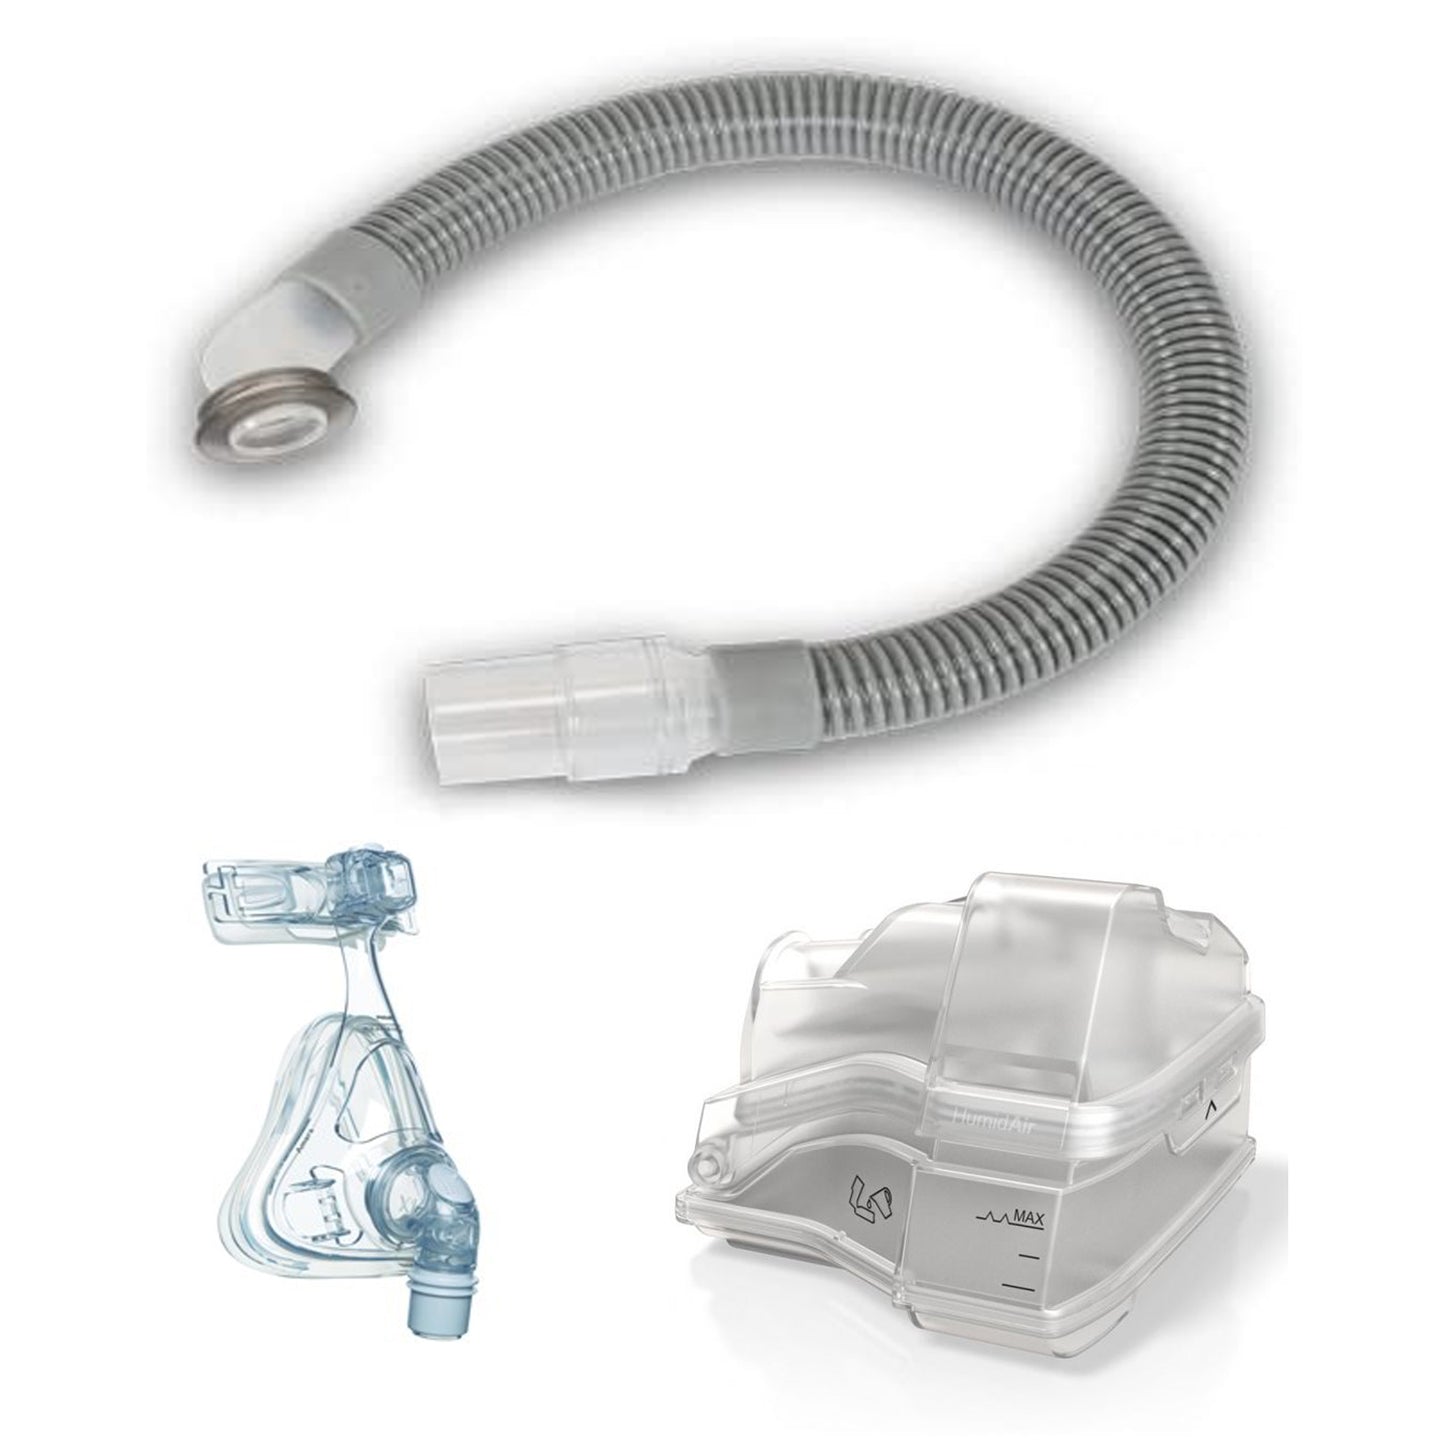 P4821-CPAP (small) | iSonic® Ultrasonic CPAP/BiPAP Cleaner, 2.5L/2.6Qt, Free Shipping!